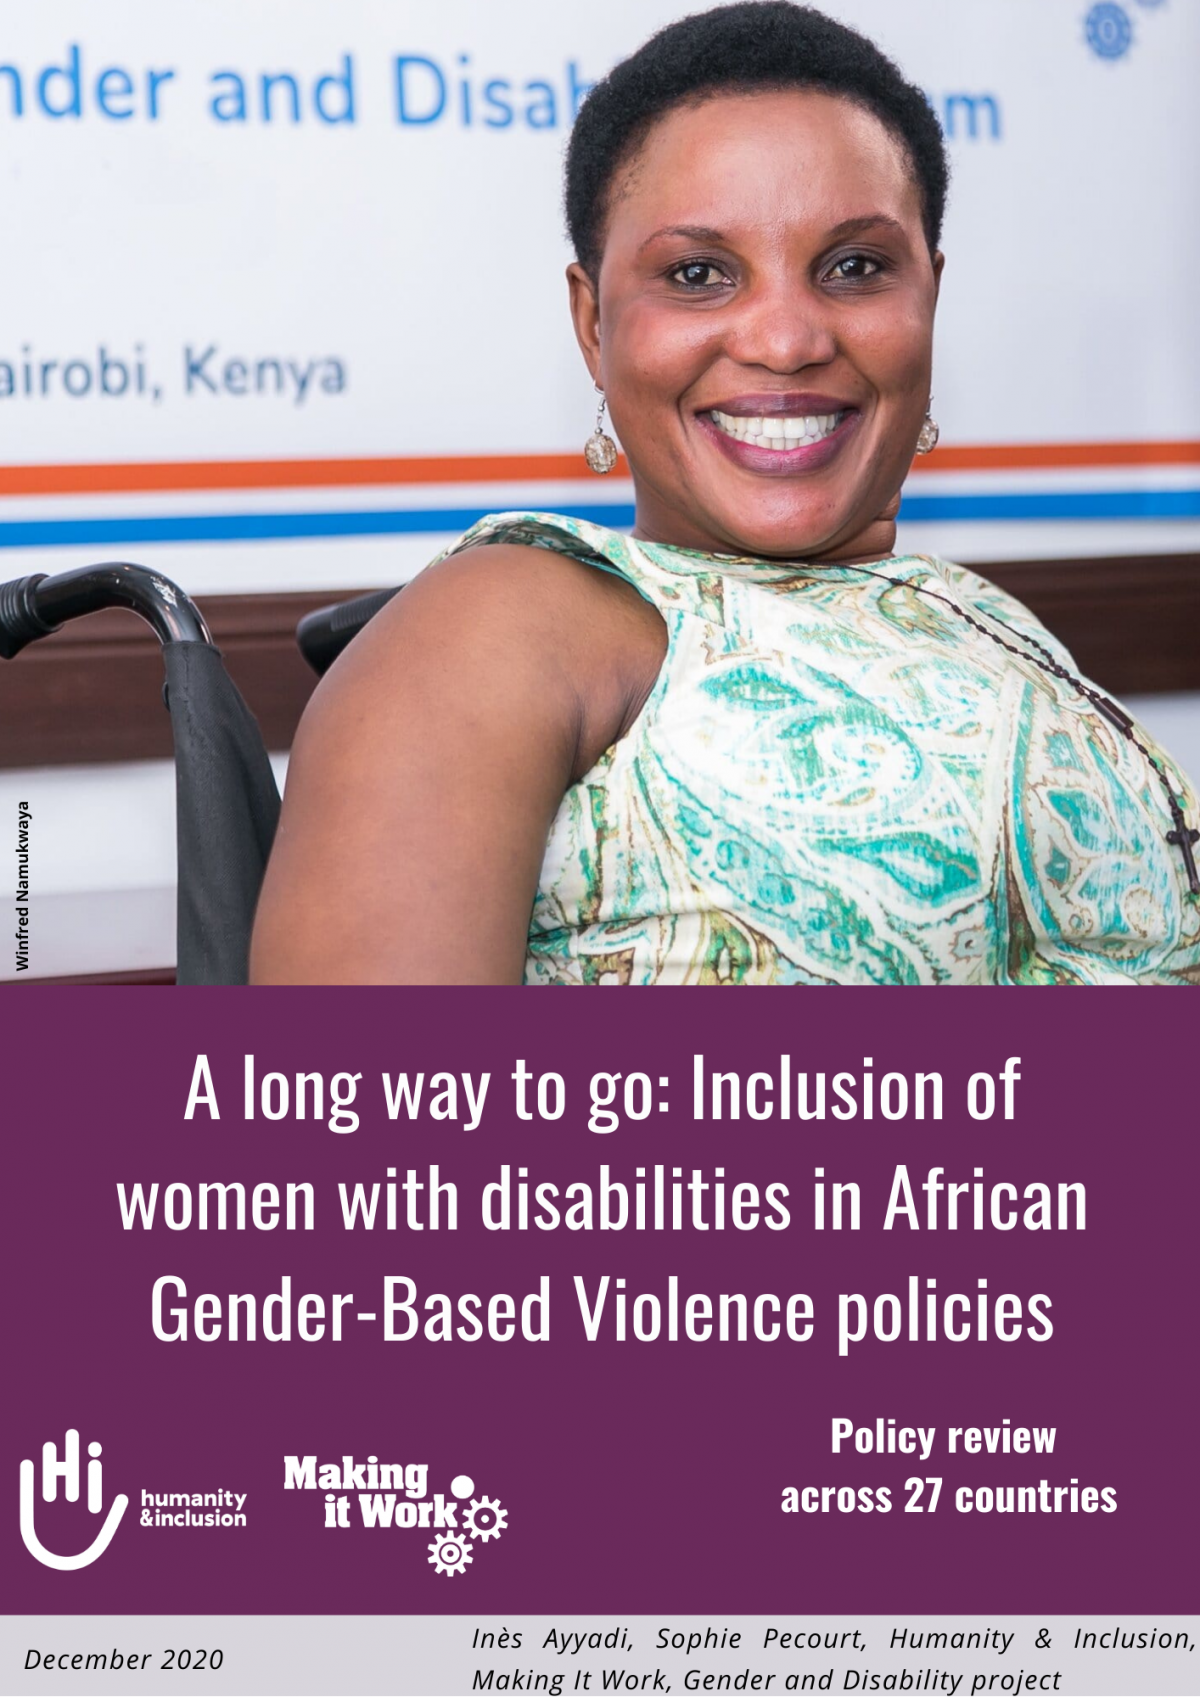 A long way to go: Inclusion of women with disabilities in African Gender-Based Violence policies. Policy review across 27 countries. Inès Ayyadi, Sophie Pecourt, HI, Making It Work Gender and Disability project, December 2020, contact: Sophie Pecourt s.pecourt@hi.org Picture of Winfred Namukwaya, Executive Direcor of MUDIWA during the Making It Work Gender and Disability Forum 2019 in Nairobi, Kenya. 